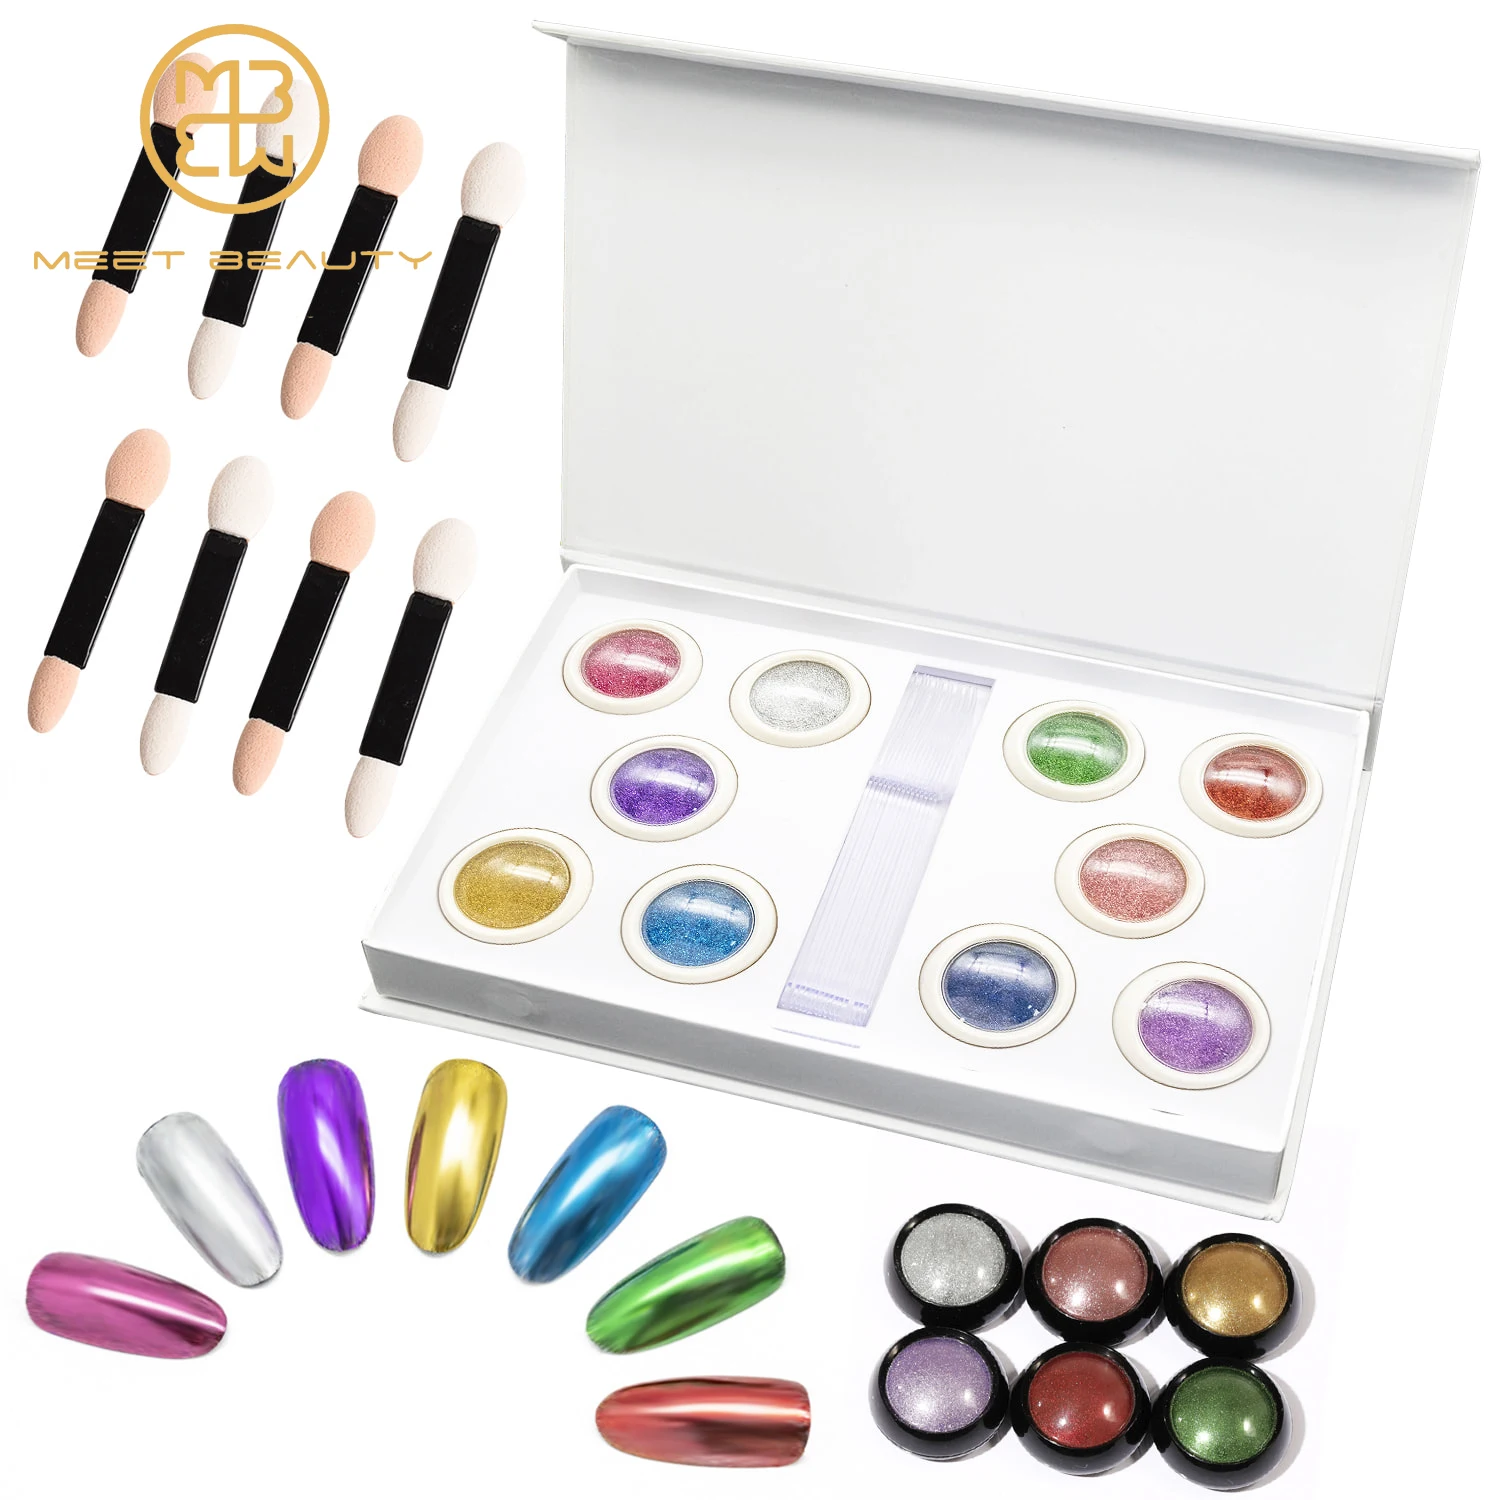 

13Colors Magic Glitter Aurora Nail Art Dipping Powder Holographic Chrome Chameleon Nail Mirror Powder Set, More than 200 colors or customized or glitter mix